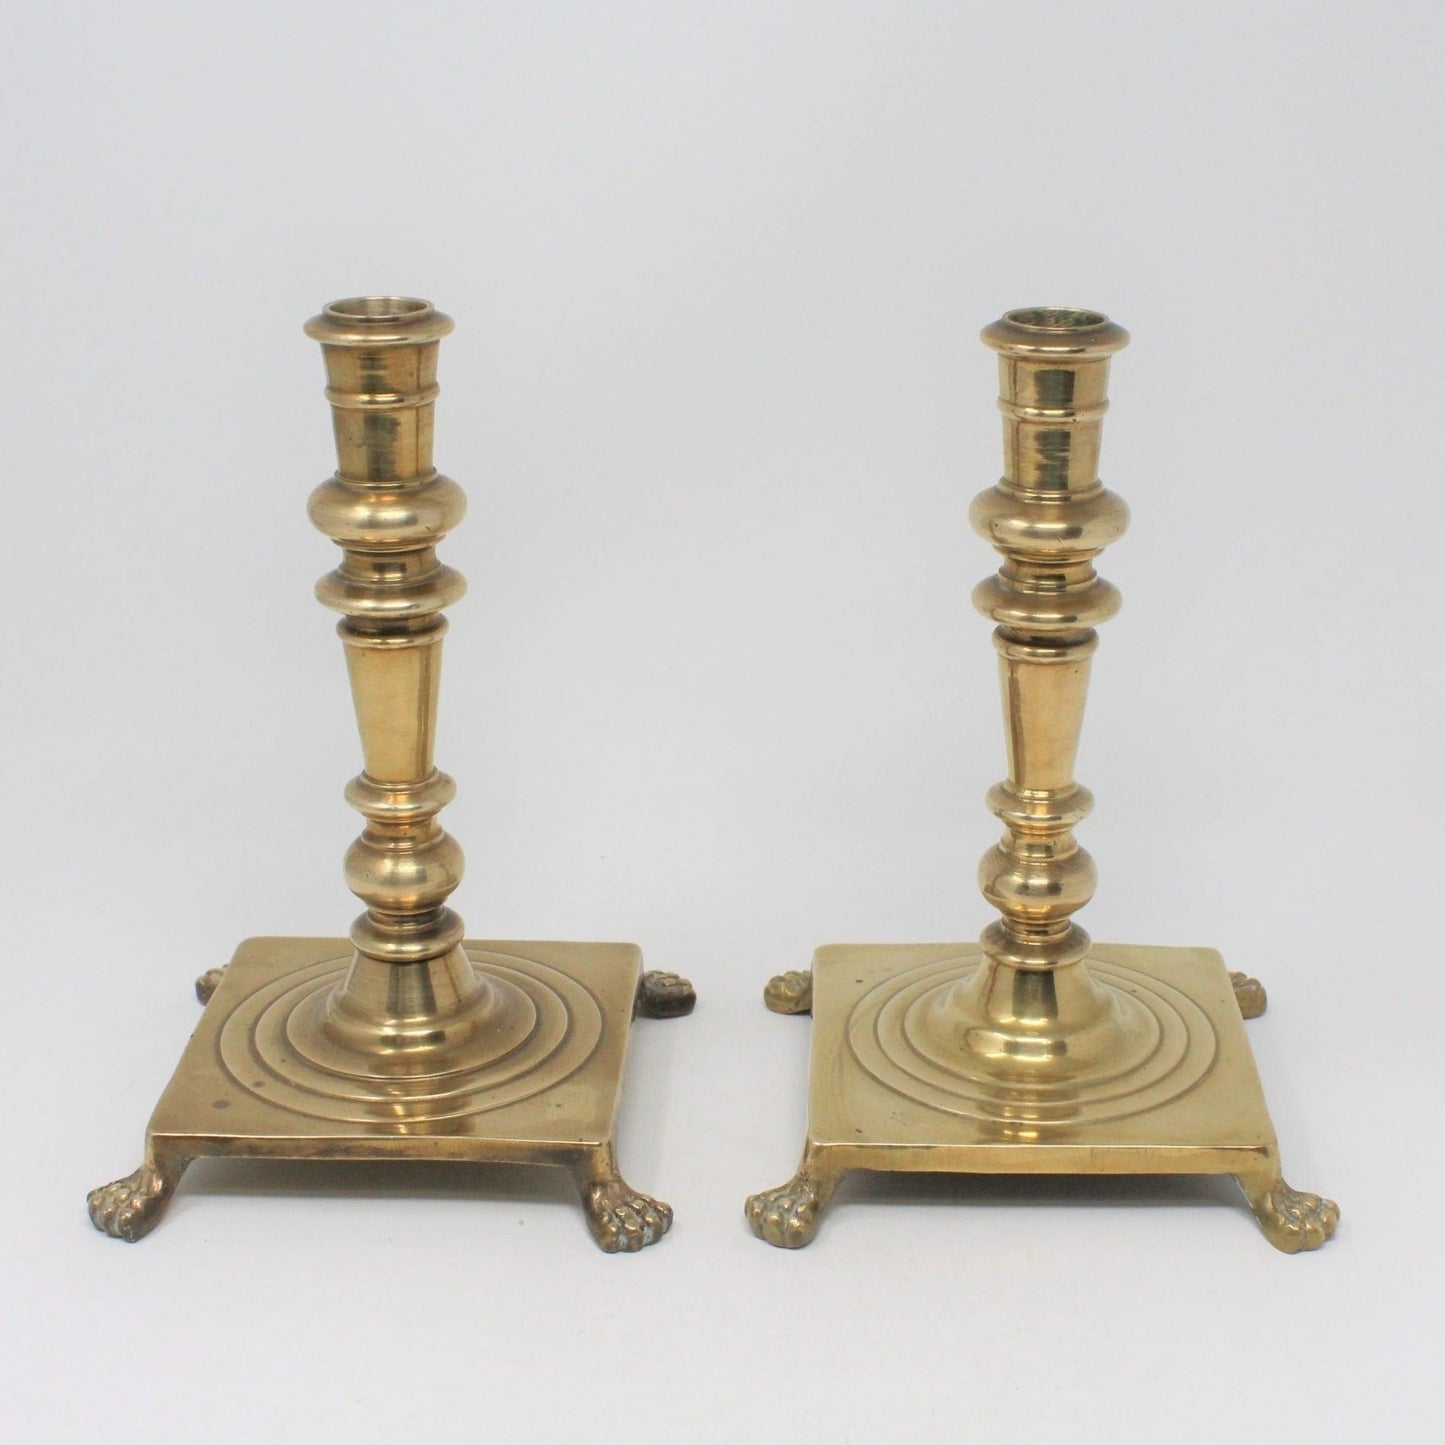 Candle Holders, Brass, Lion Claw Feet, Set of 2, Vintage Hong Kong